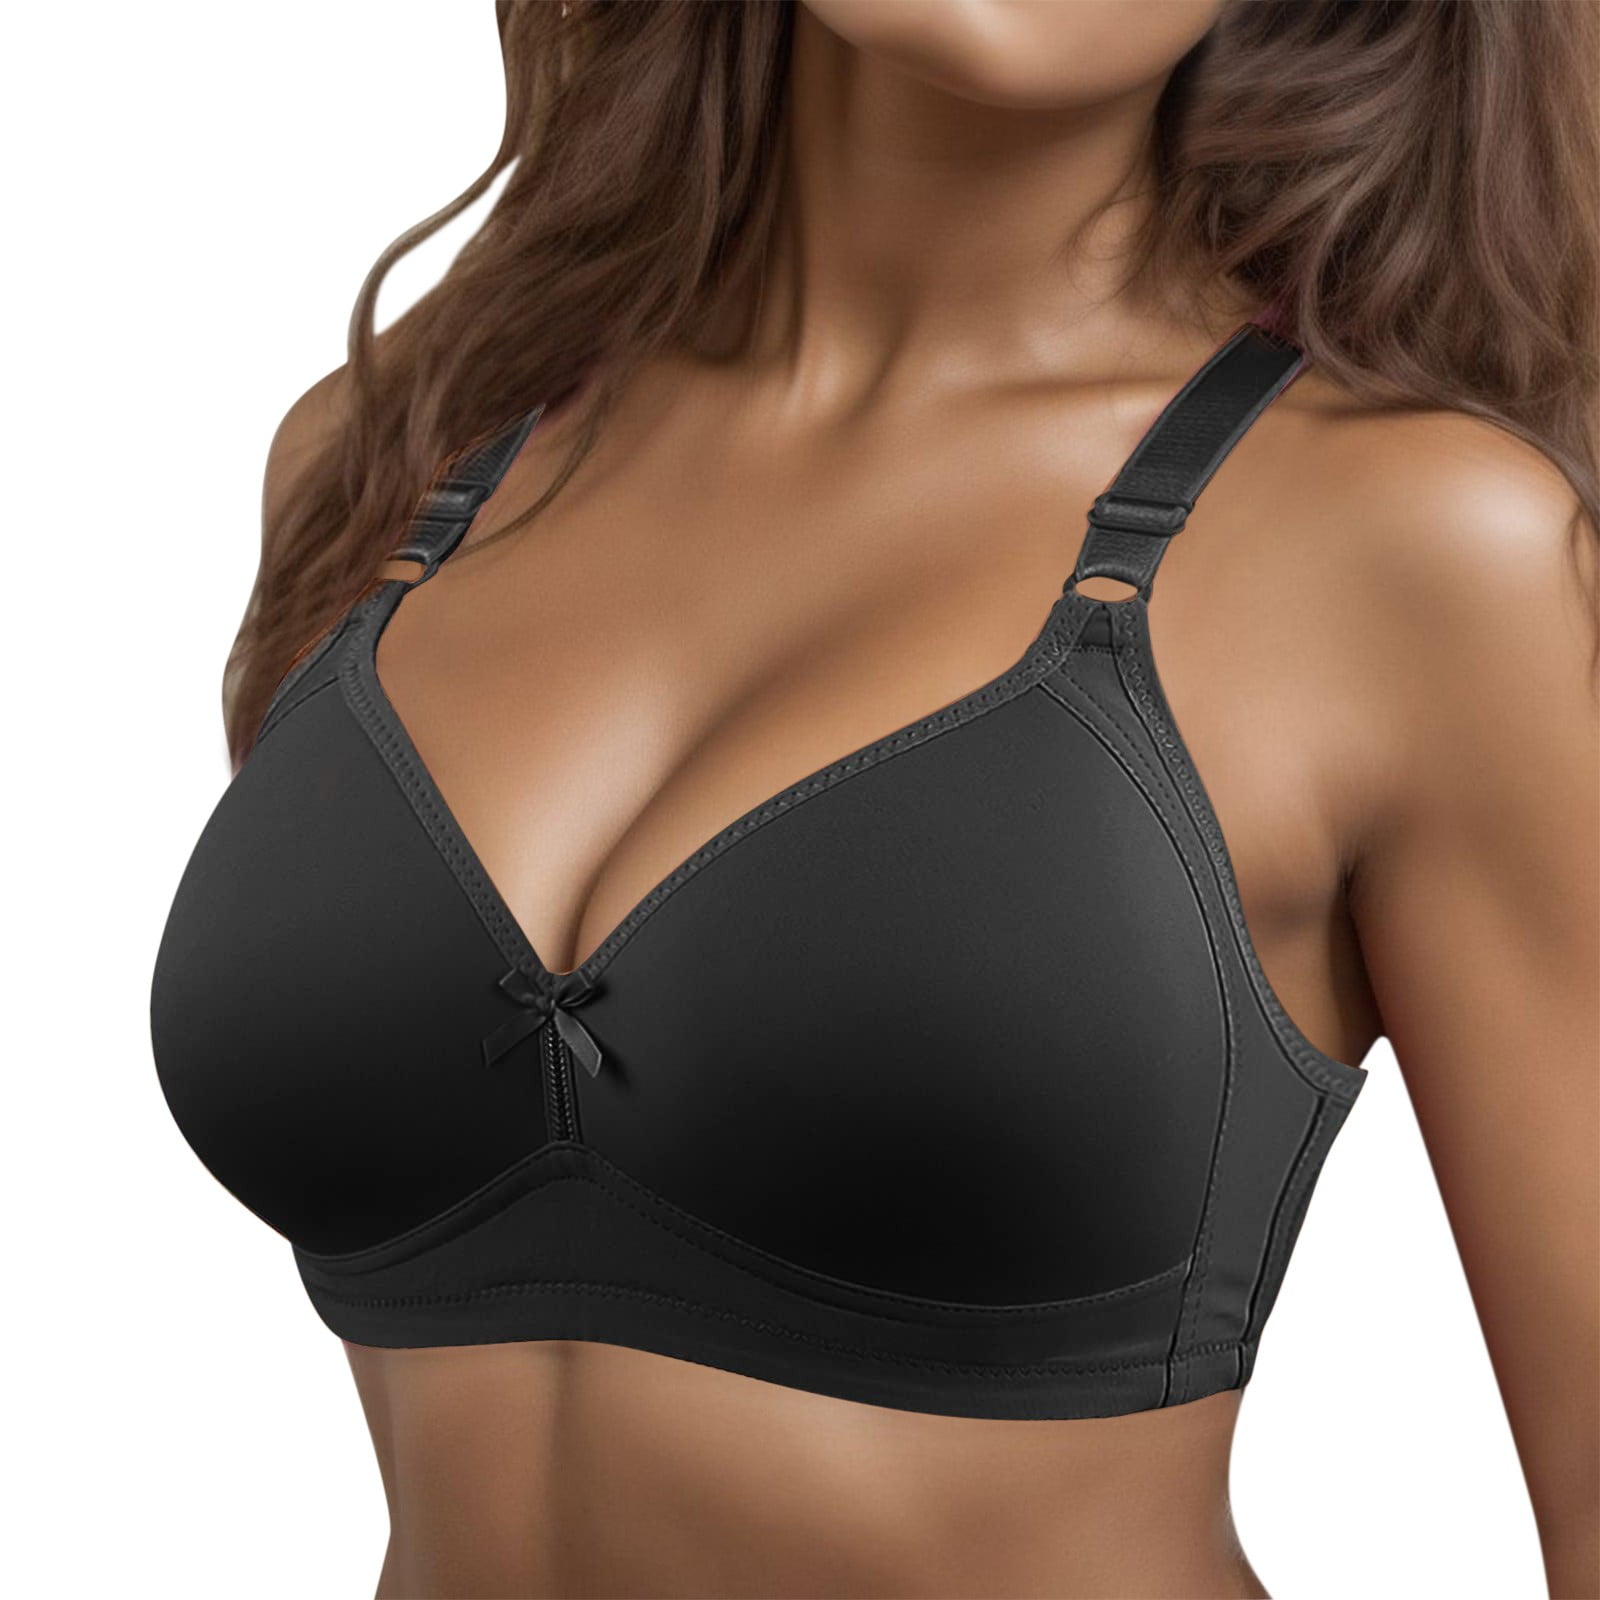 Fsqjgq Front Closure Bra for Women Push up Padded Shaping Cup Bras Woman  Adjustable Shoulder Strap Seamless Underwear Lingerie Top Grey 36 